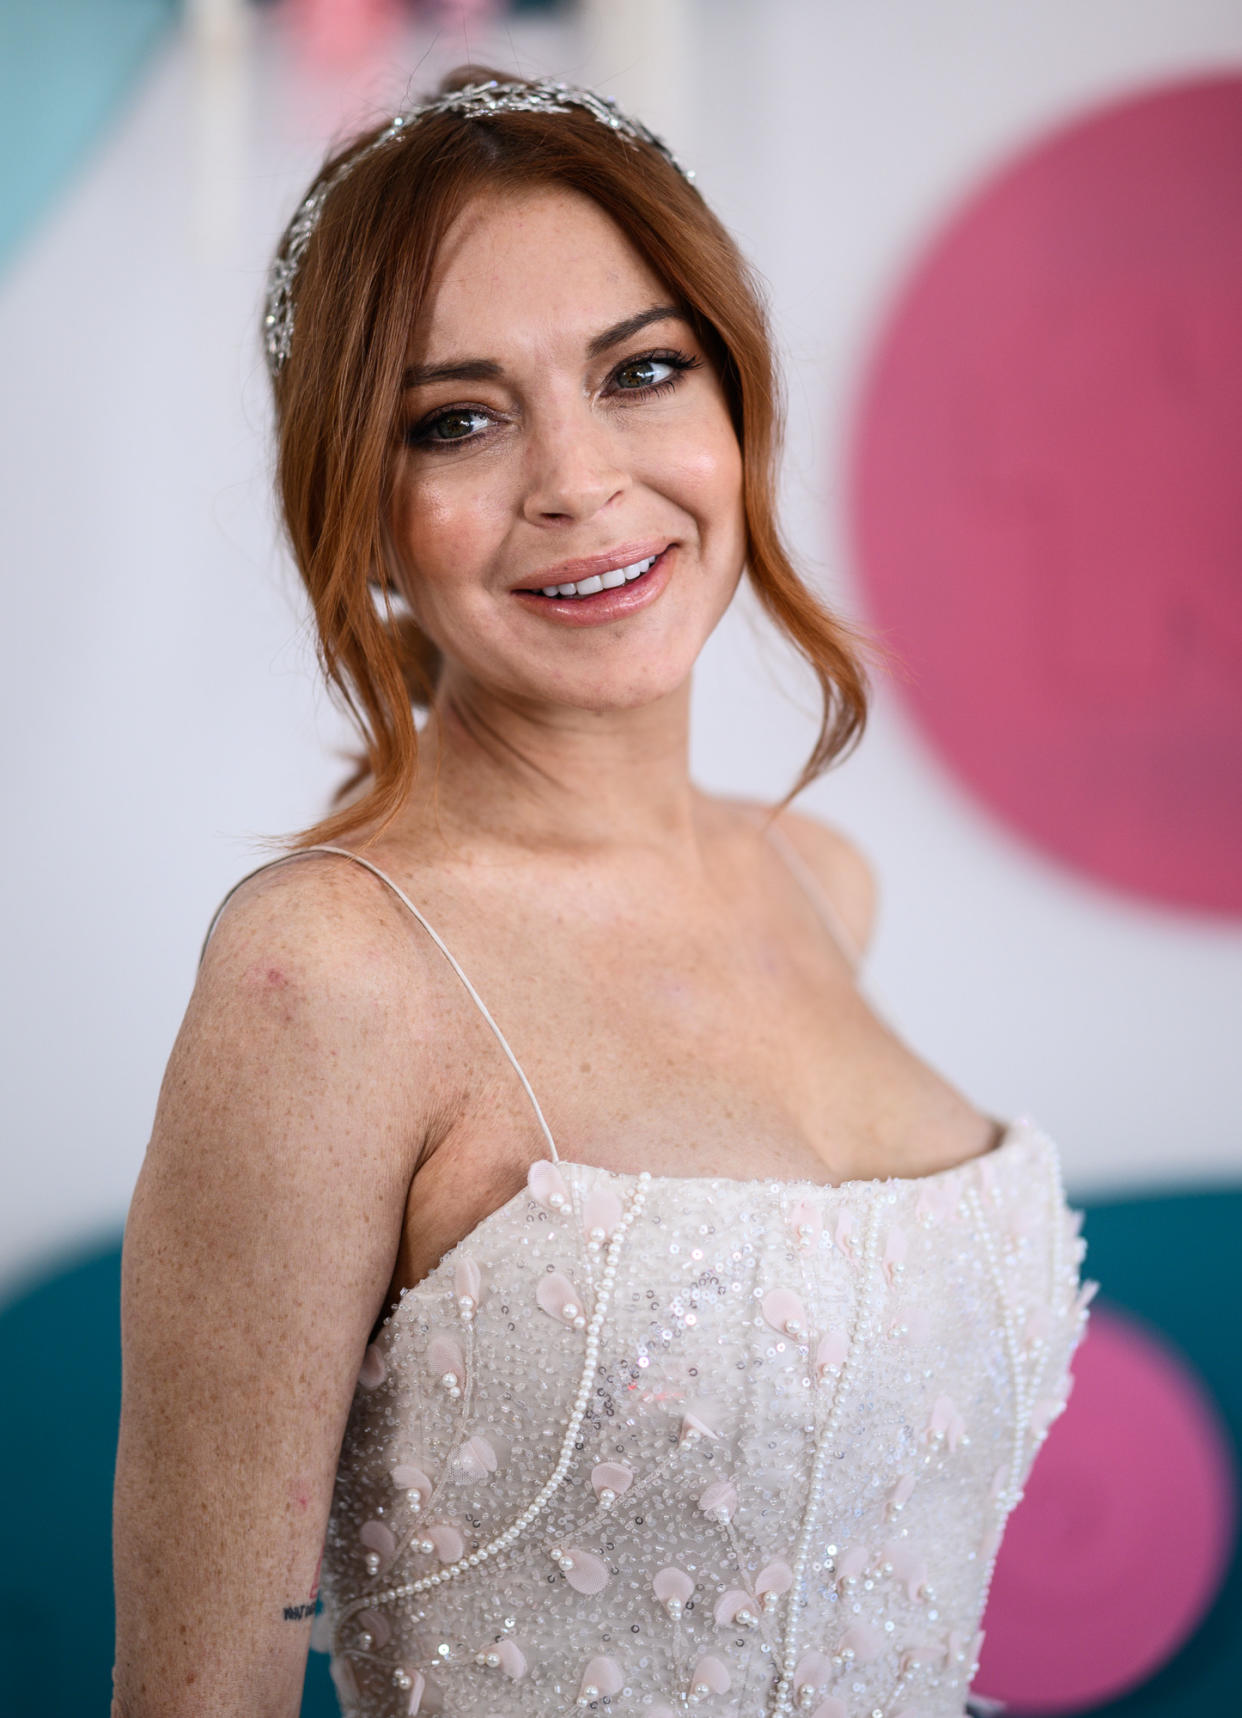 Lindsay Lohan has announced her engagement. (Photo: James Gourley/Getty Images)